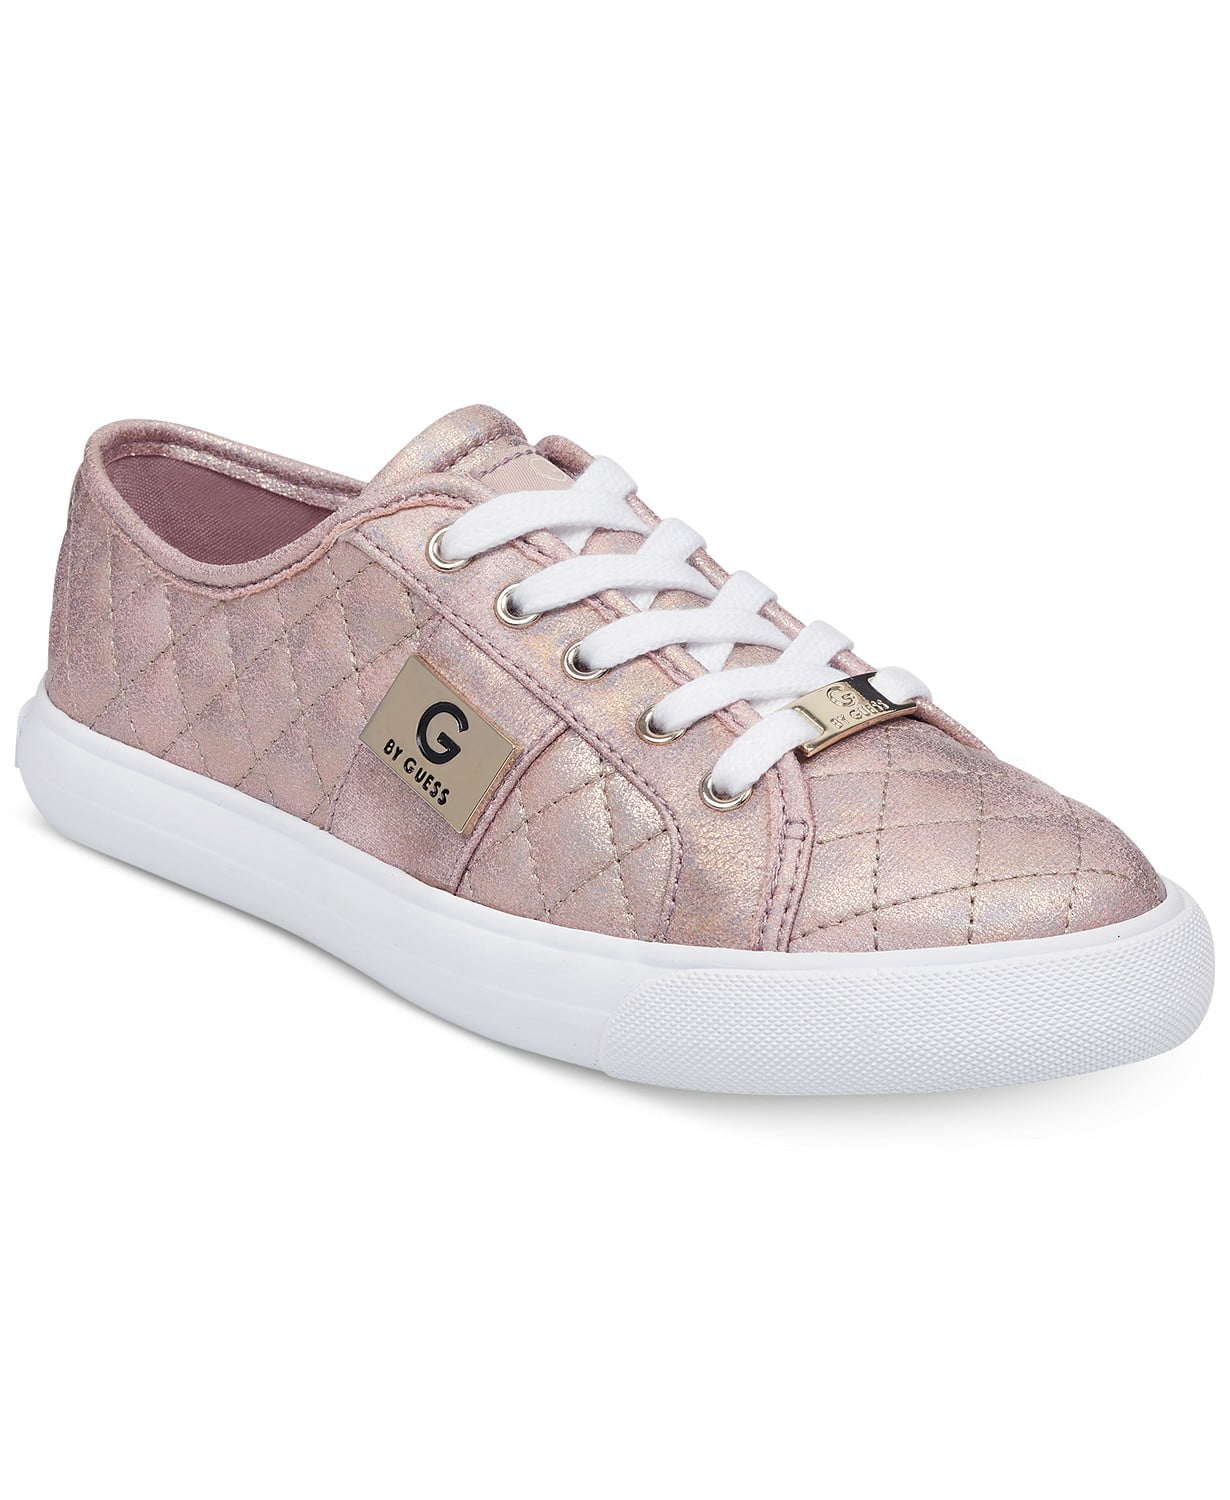 Extractie Chemie Omtrek G by Guess Women's Backer2 Lace Up Leather Quilted Pattern Sneakers Shoes  Pink (9.5) - Walmart.com